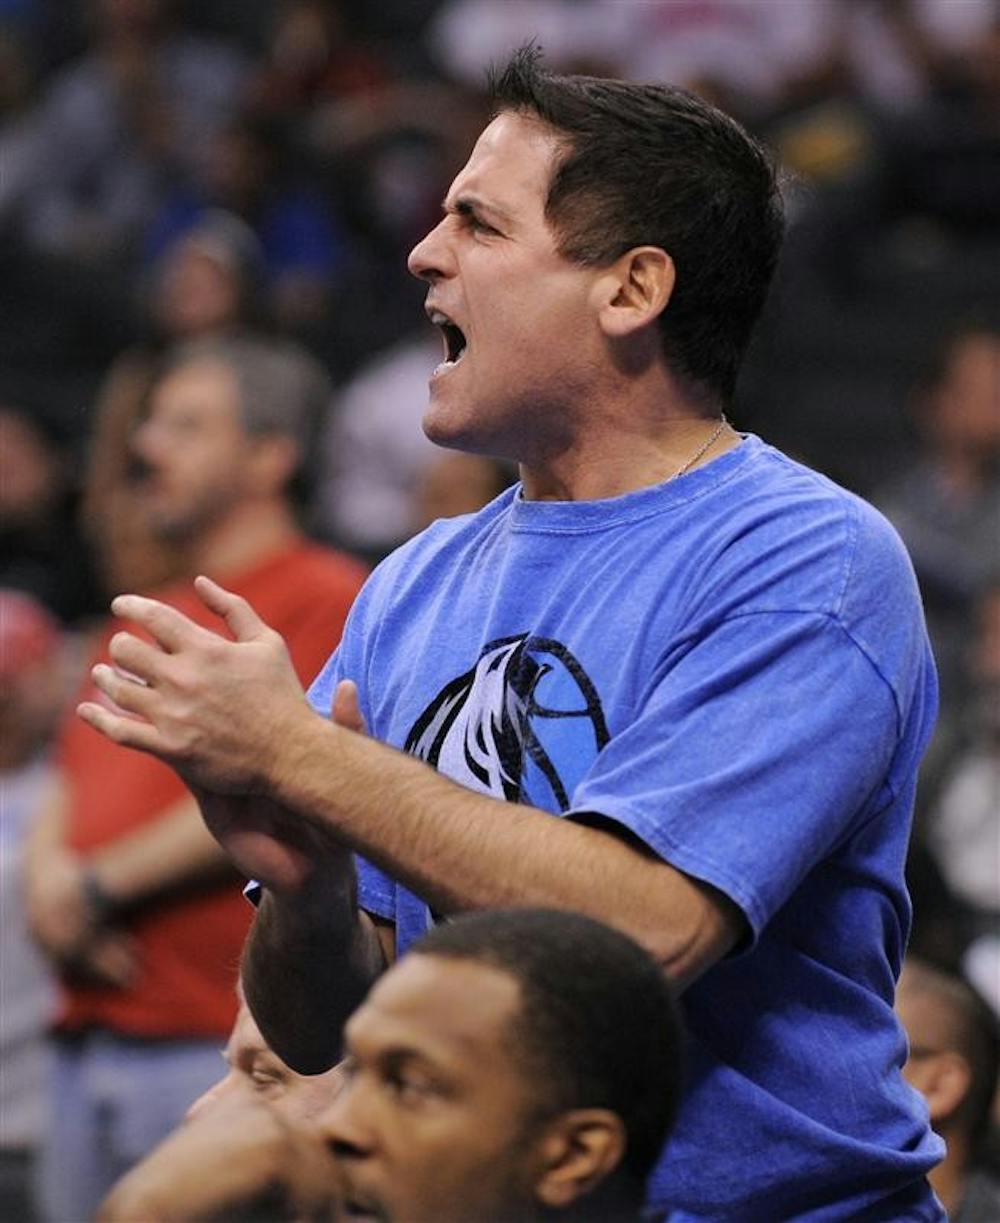 Dallas Mavericks owner Mark Cuban yells at referees during the second half of their NBA basketball game against the Los Angeles Clippers on Nov. 9 in Los Angeles. Cuban was charged with insider trading for allegedly using confidential information on a stock sale to avoid more than $750,000 in losses.